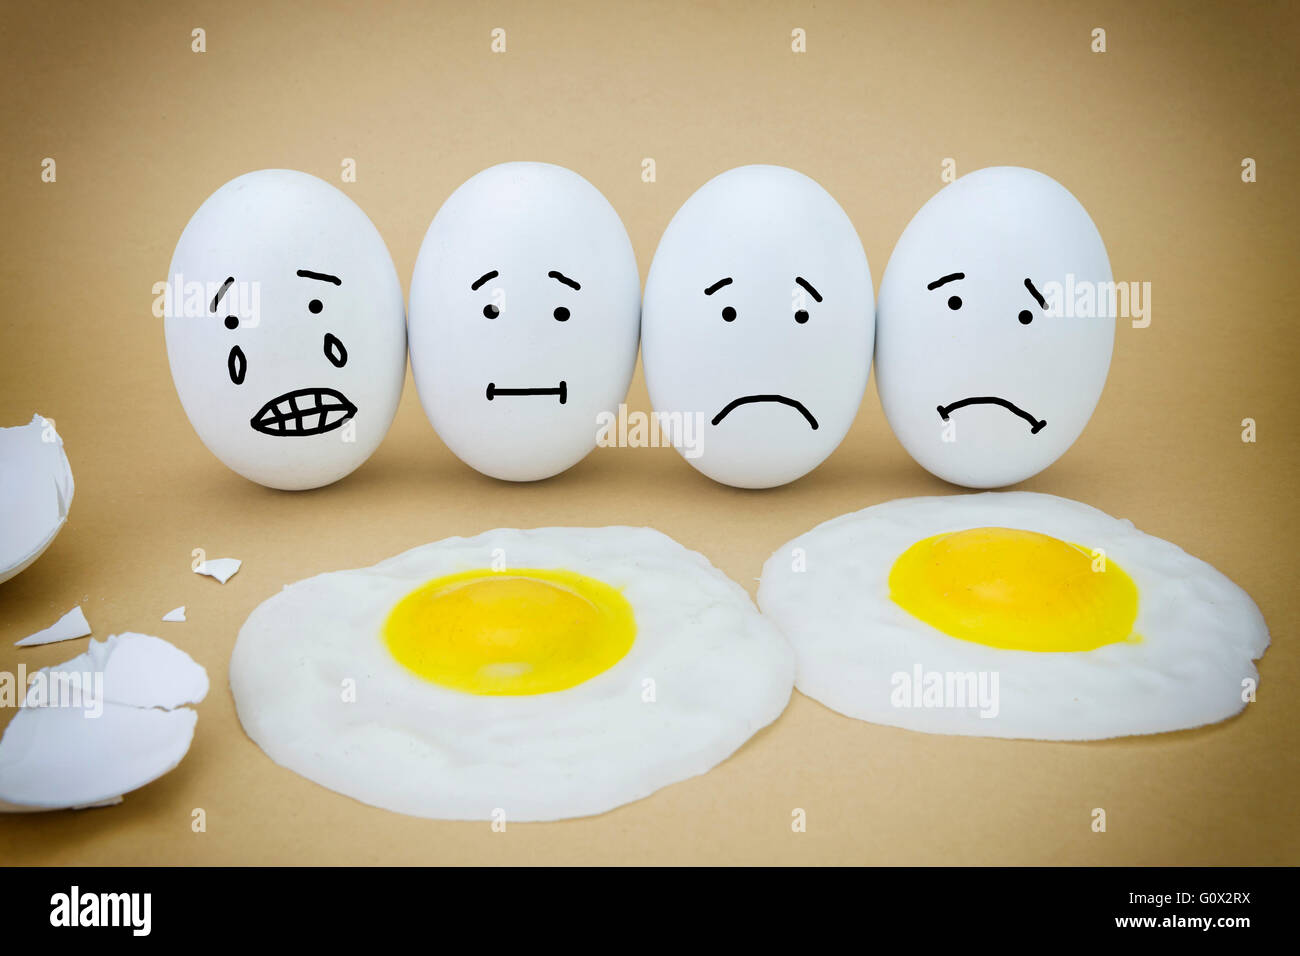 Funny emotional eggs crying and laughing in the box with yolk Stock Photo